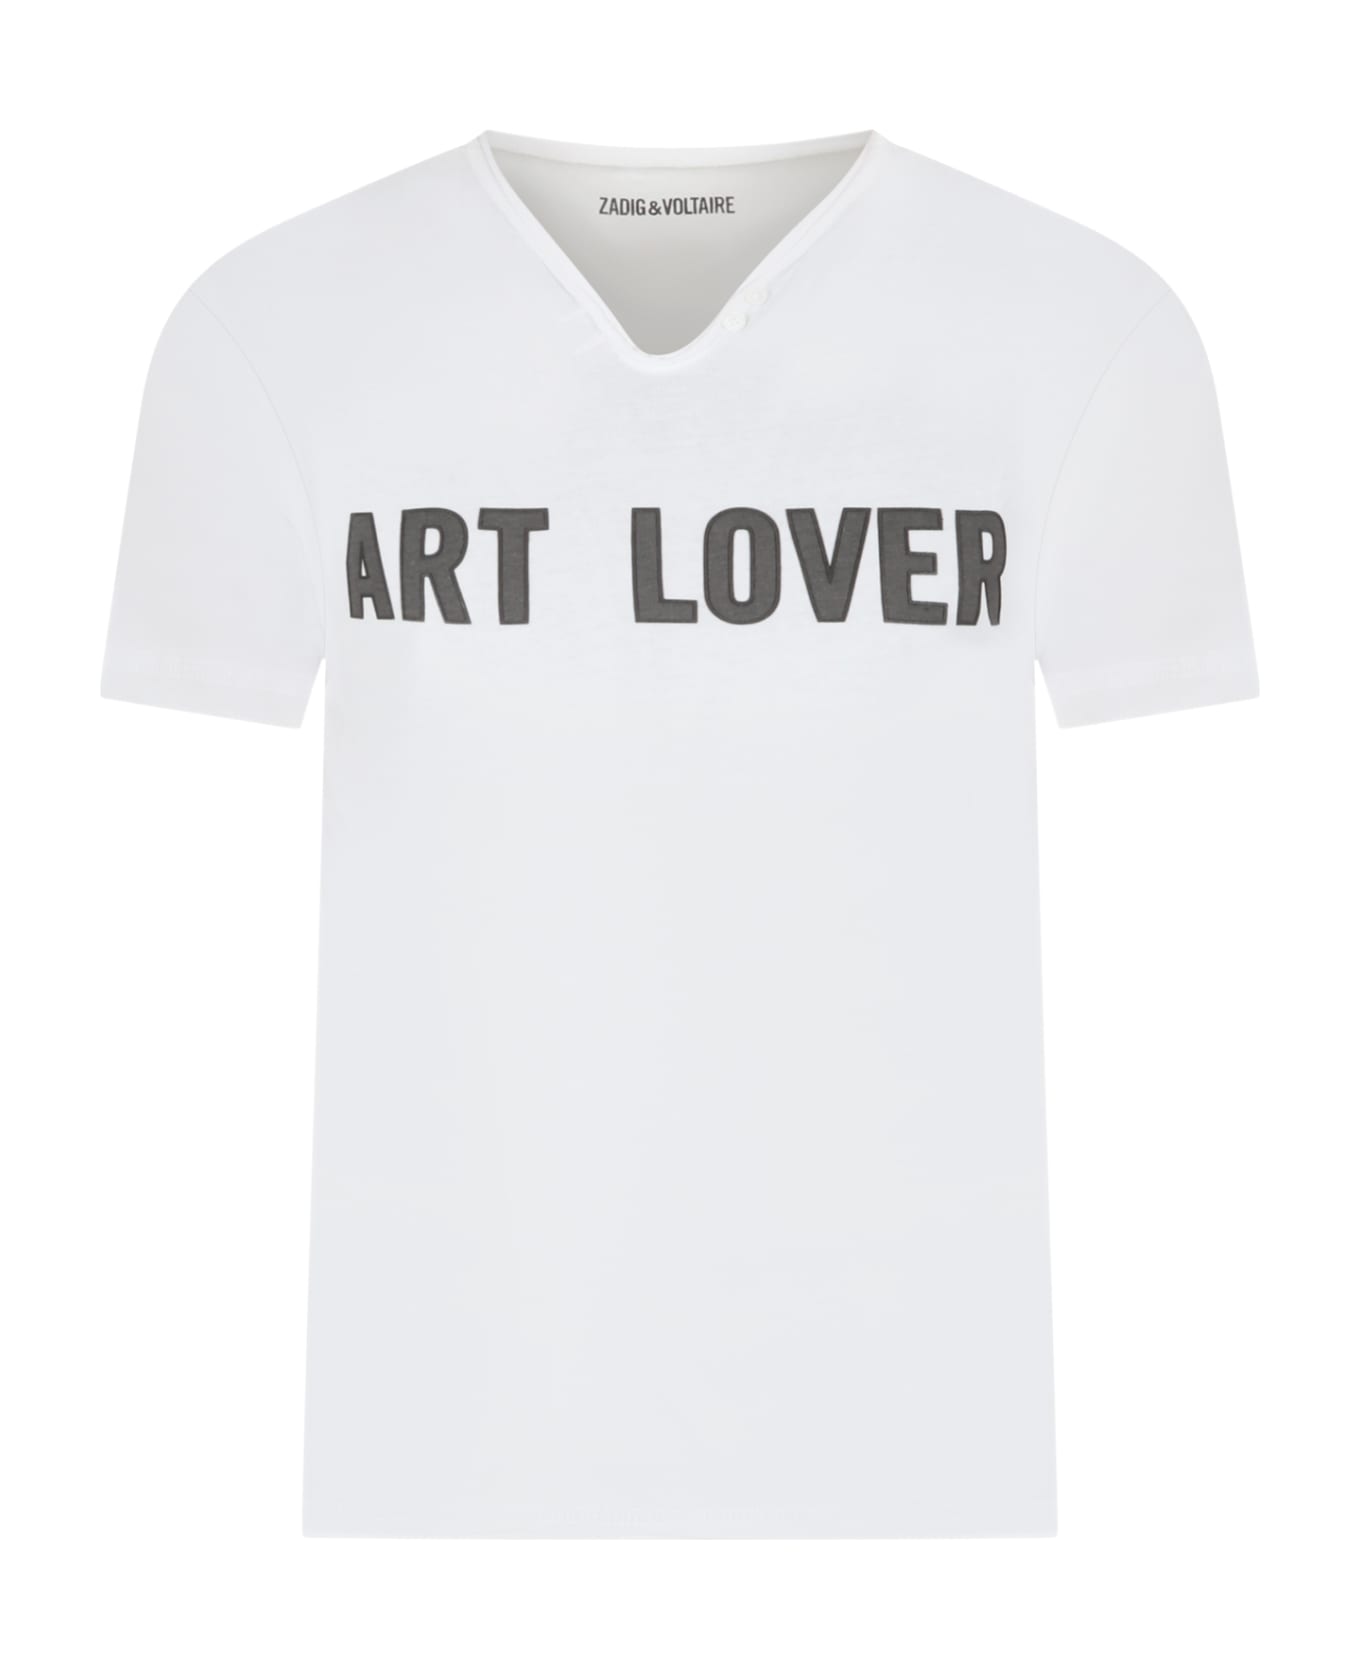 Zadig & Voltaire White T-shirt For Boy With Black Writing - White